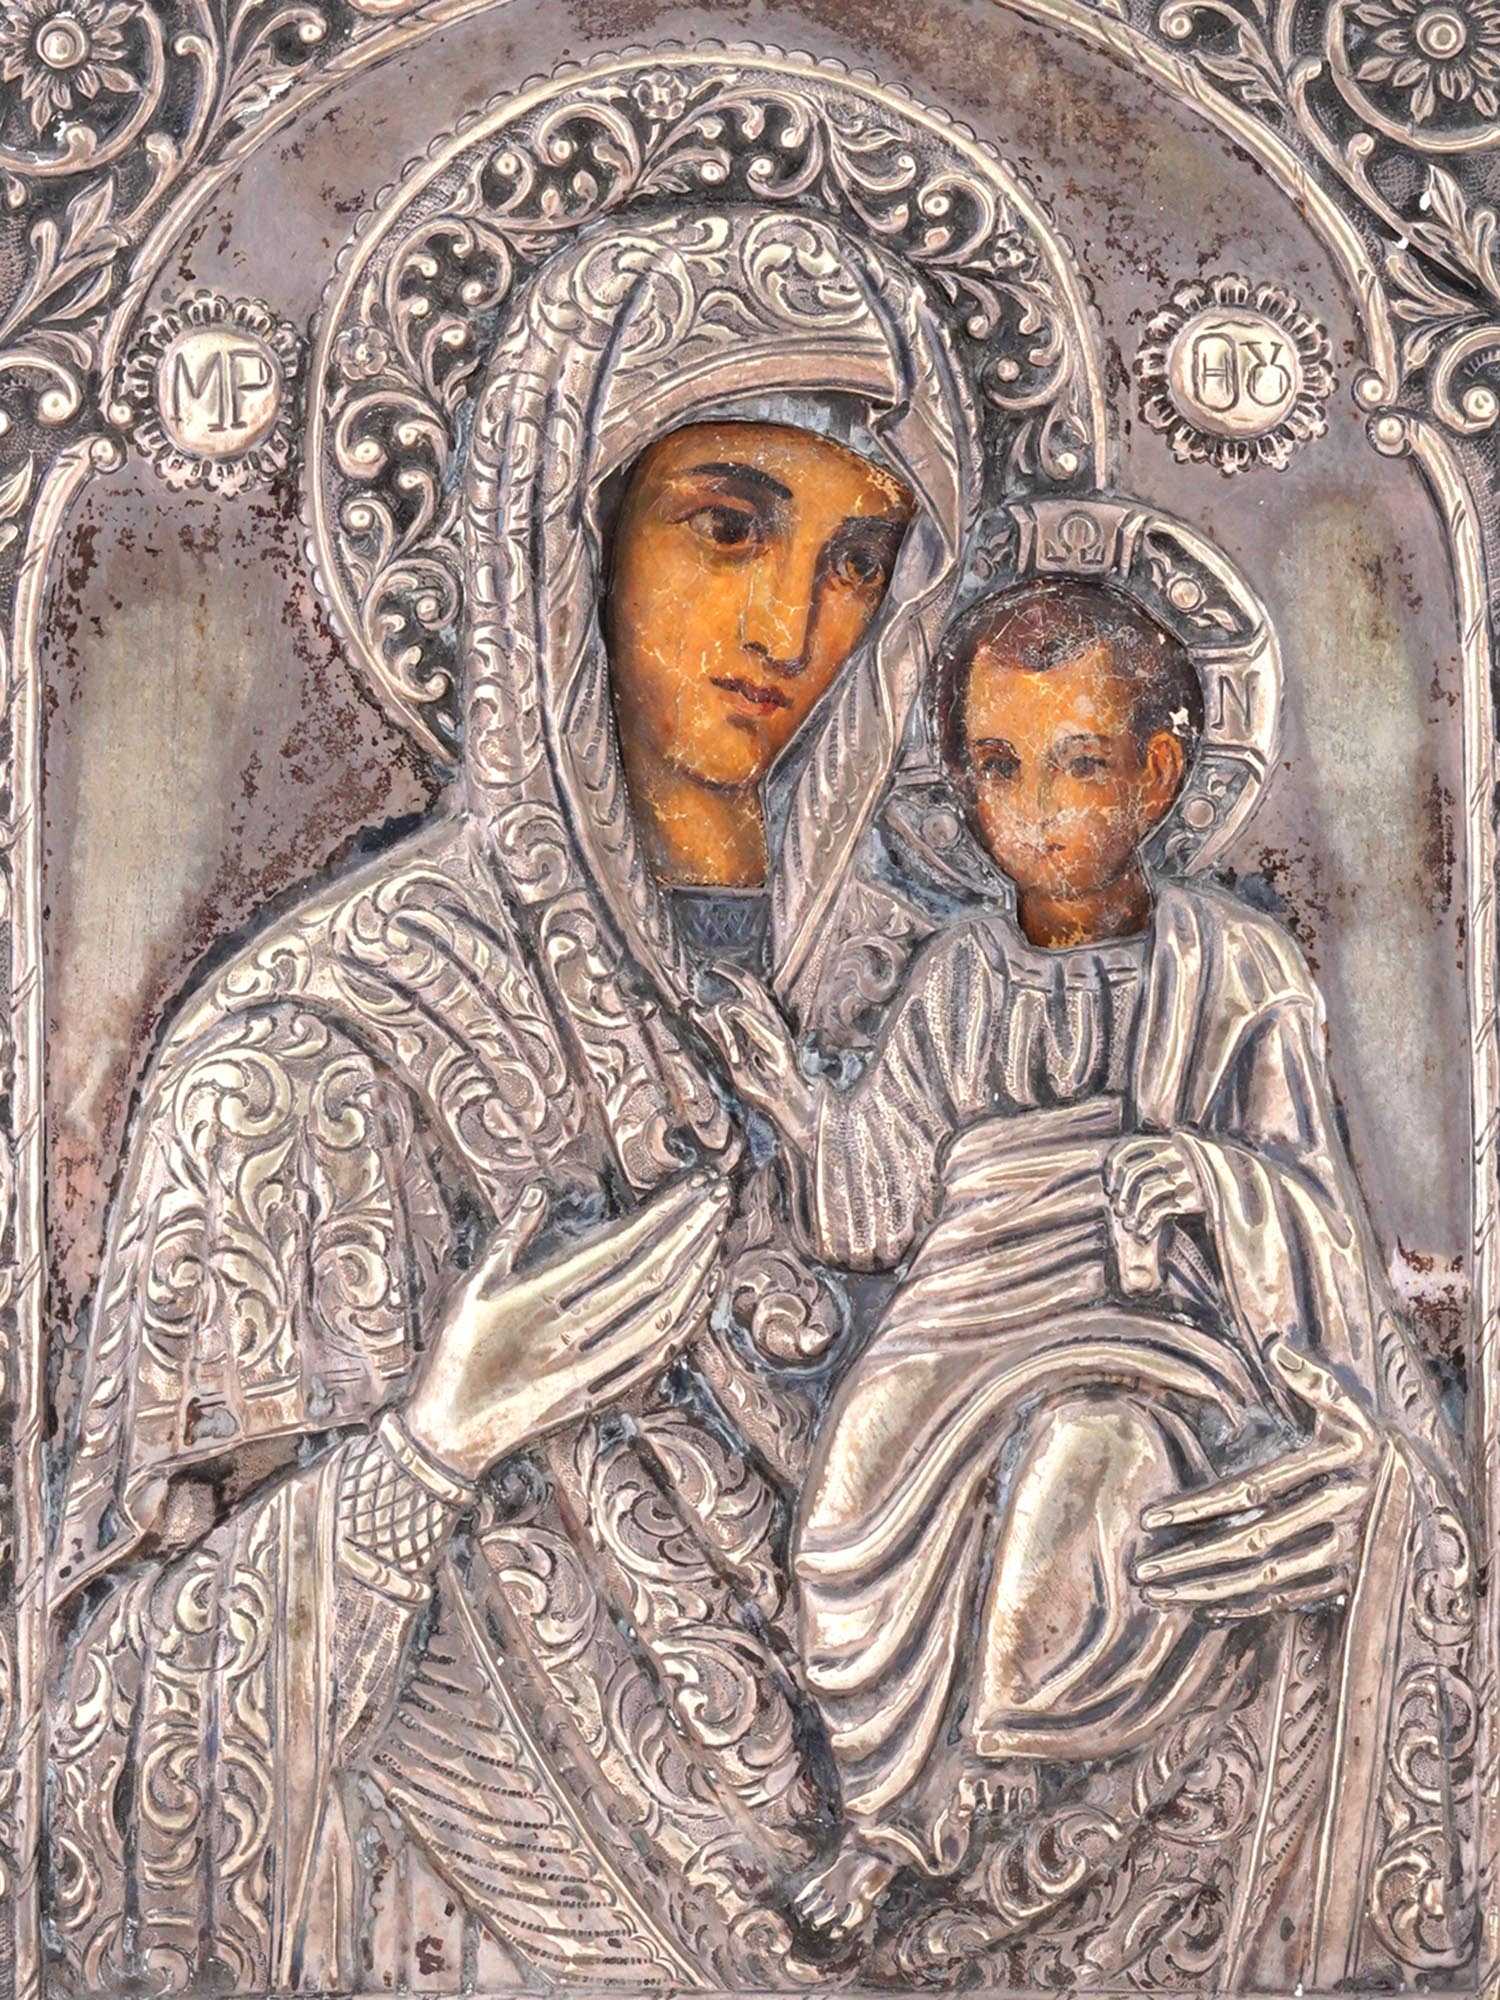 ANTIQUE GREEK ORTHODOX ICONS VIRGIN MARY IN OKLAD PIC-2